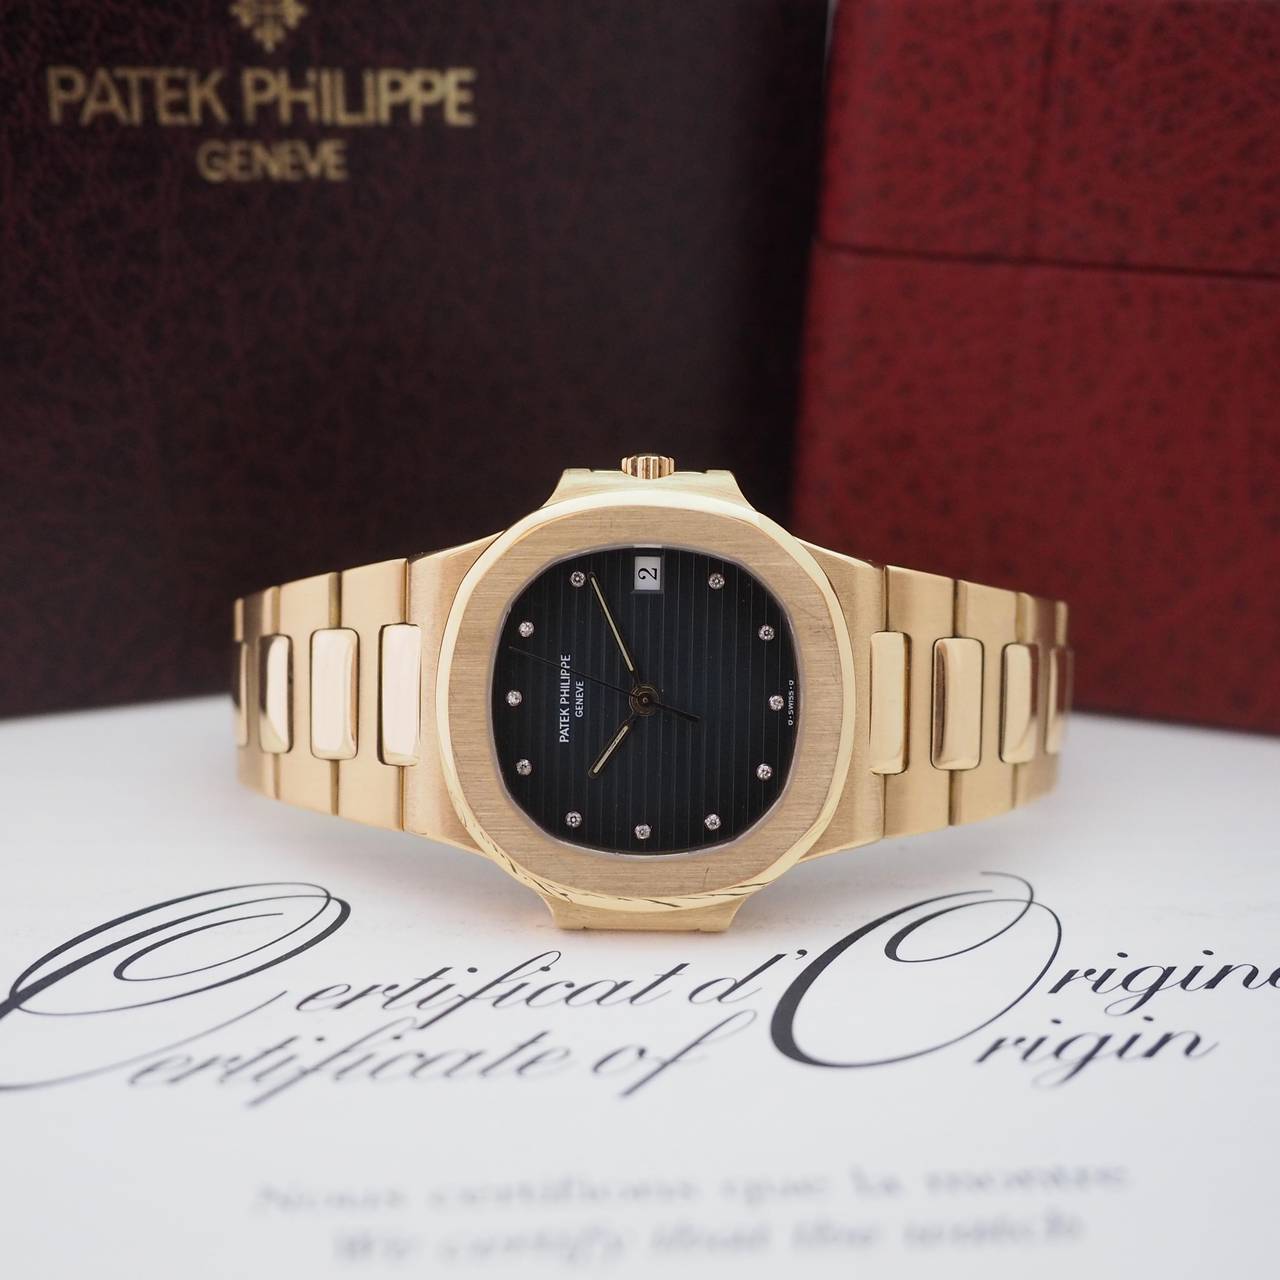 Patek Philippe
Patek Philippe Nautilus
Ref. 3800/1
18K Yellow Gold Case
Deep Blue Dial with Diamonds and Original Black Dial
18K Yellow Gold Bracelet
Automatic Winding
Diameter: 38mm
Year: 1996

Accompanied by Original Box and Certificate